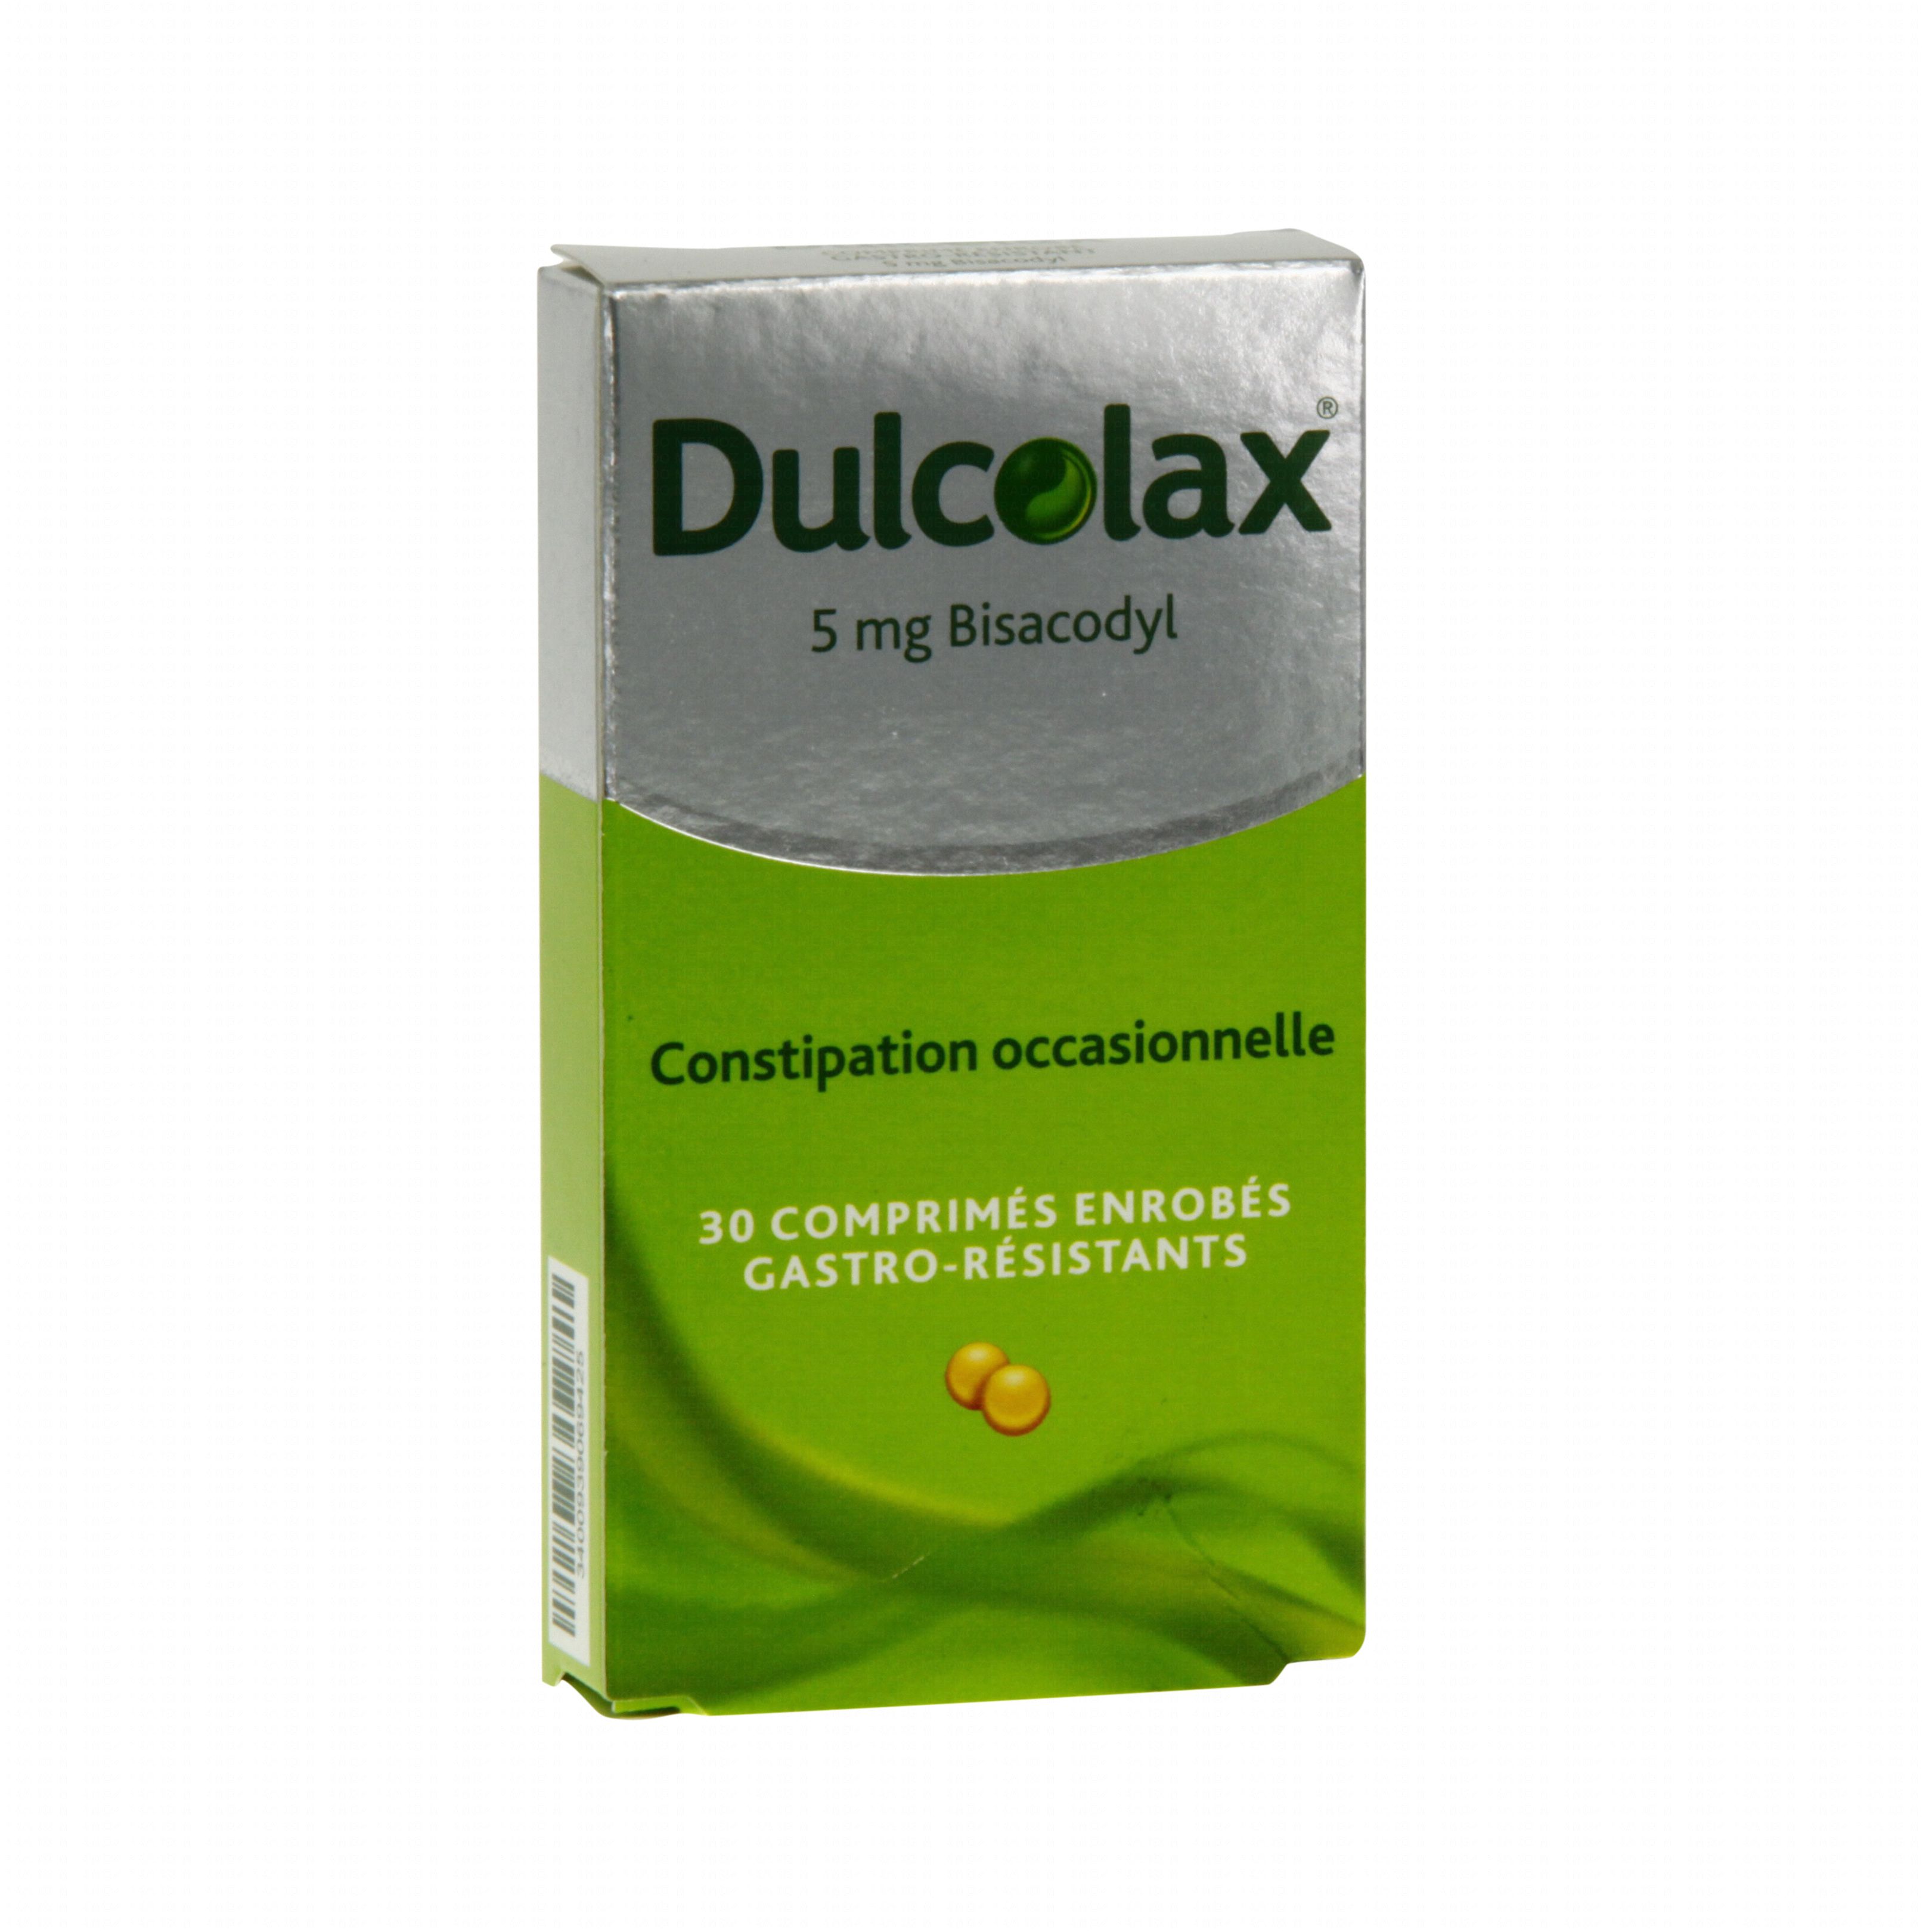 where can i buy dulcolax suppositories